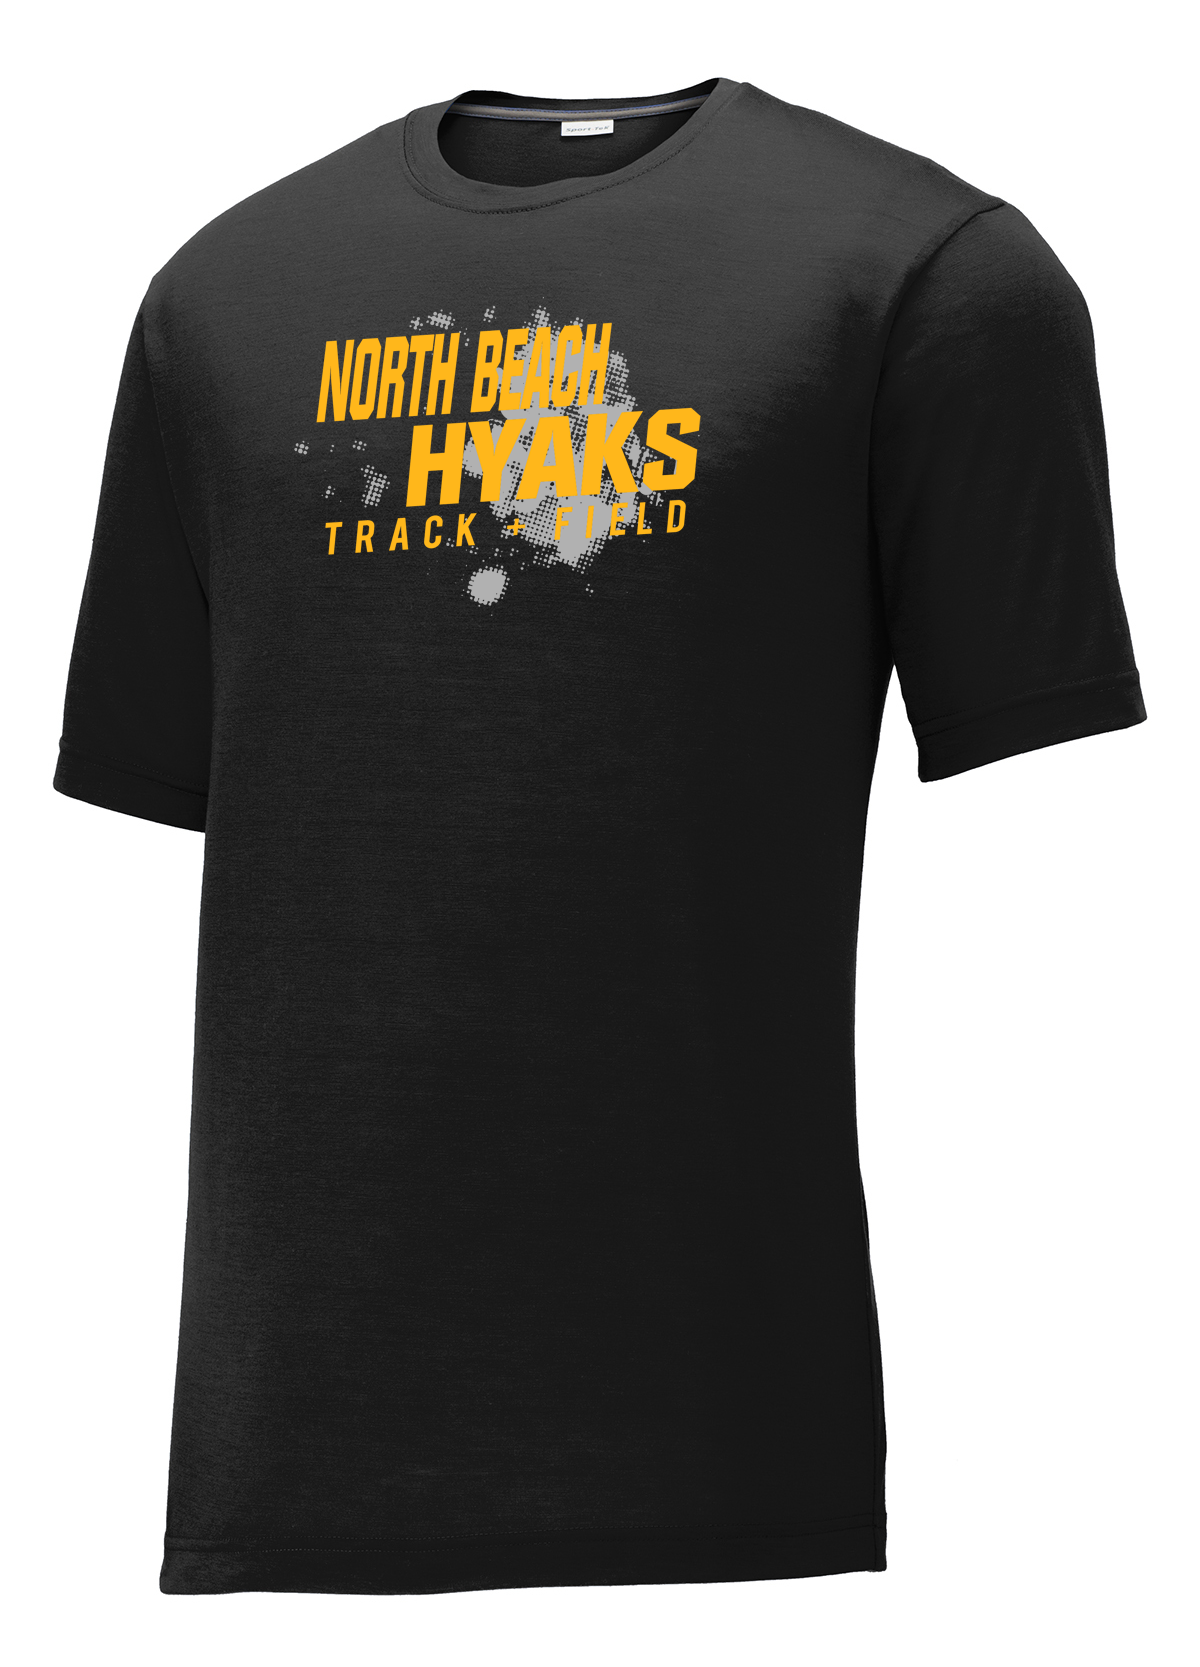 North Beach Track & Field CottonTouch Performance T-Shirt